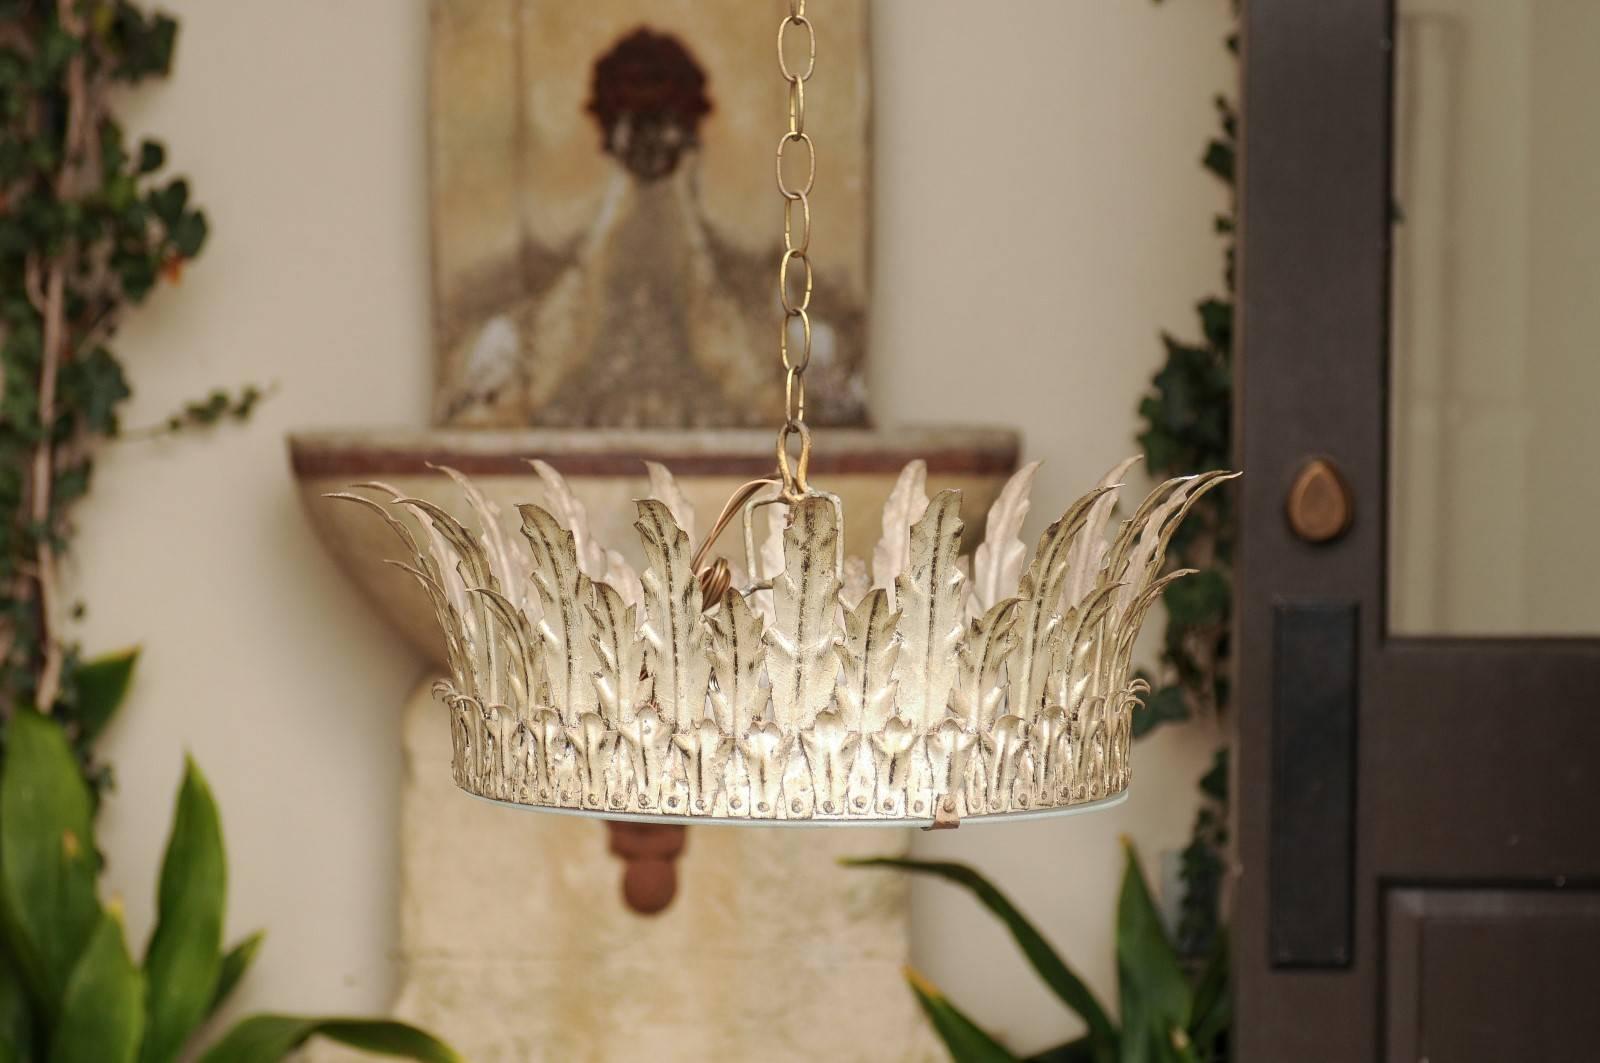 A vintage Spanish silver gilt metal crown three-light light fixture from the mid-20th century with foliage décor and frosted glass. Born during the 1950s-1960s in Spain, this crown light fixture features an exquisite silver gilt metal structure,